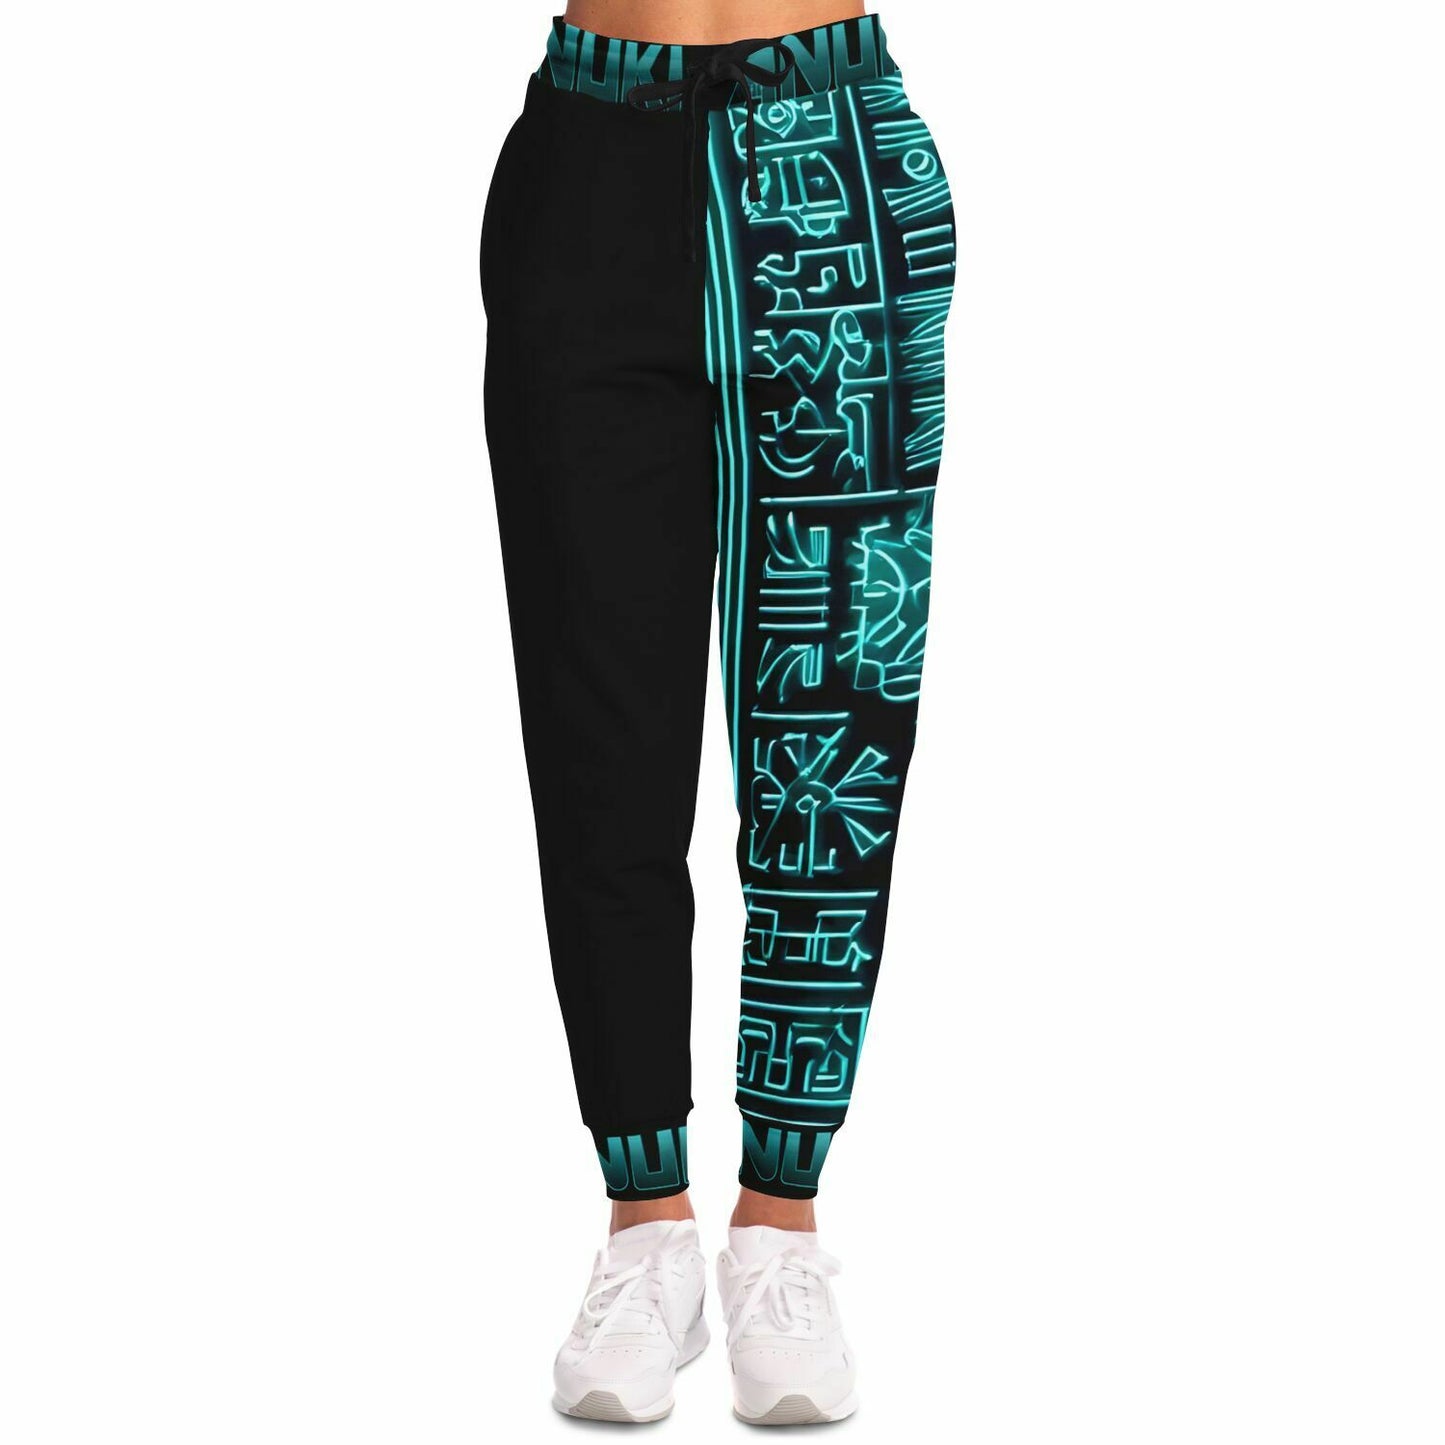 The SabreNeon Joggers